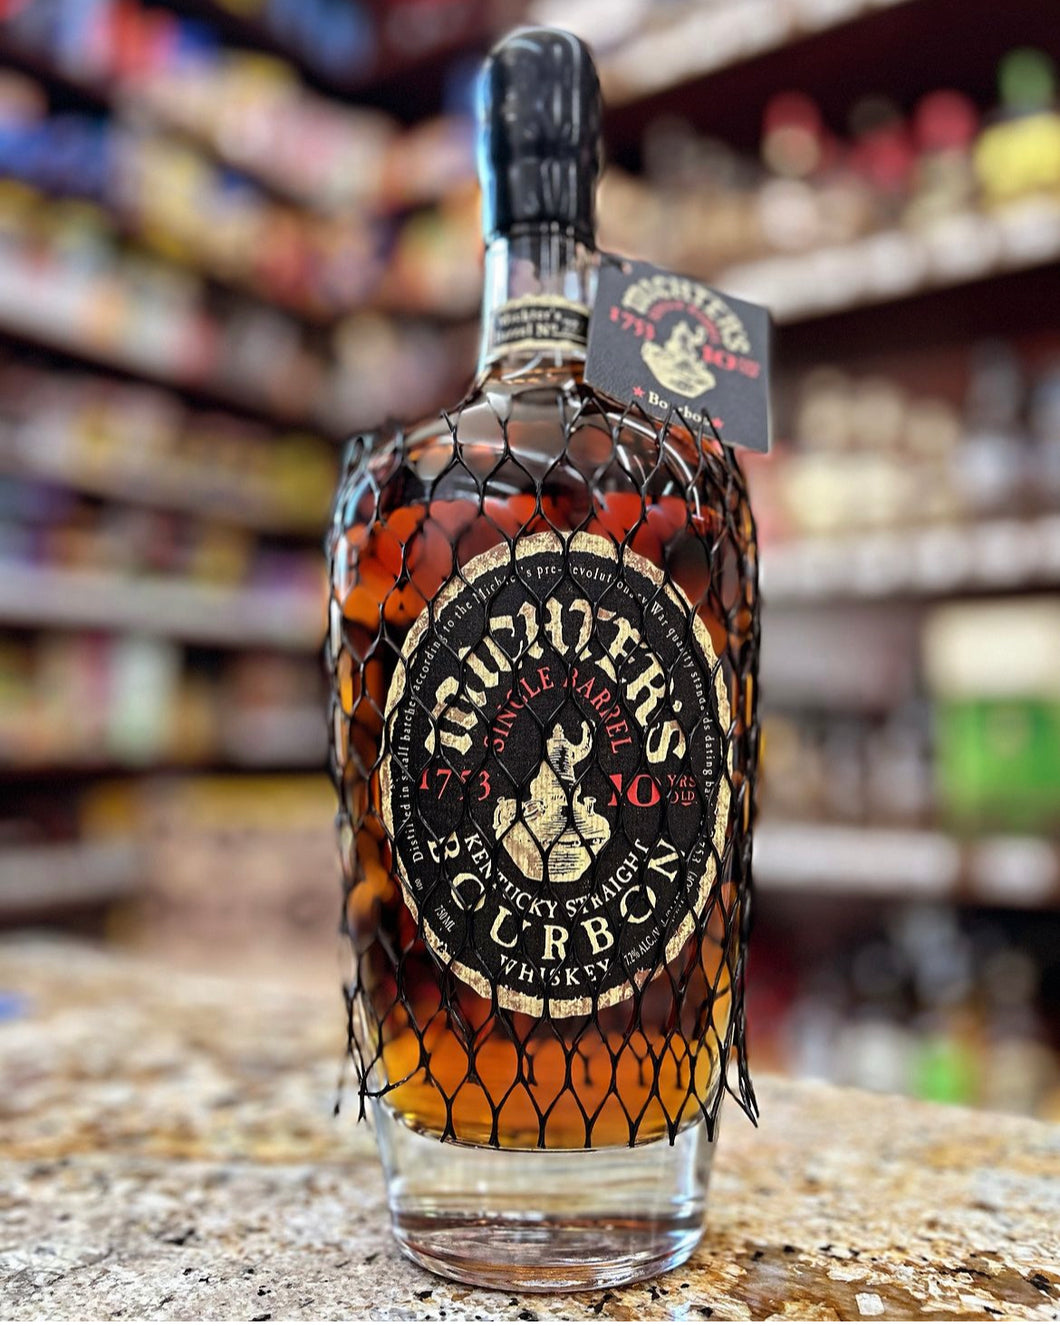 Michters 10 year old single barrel